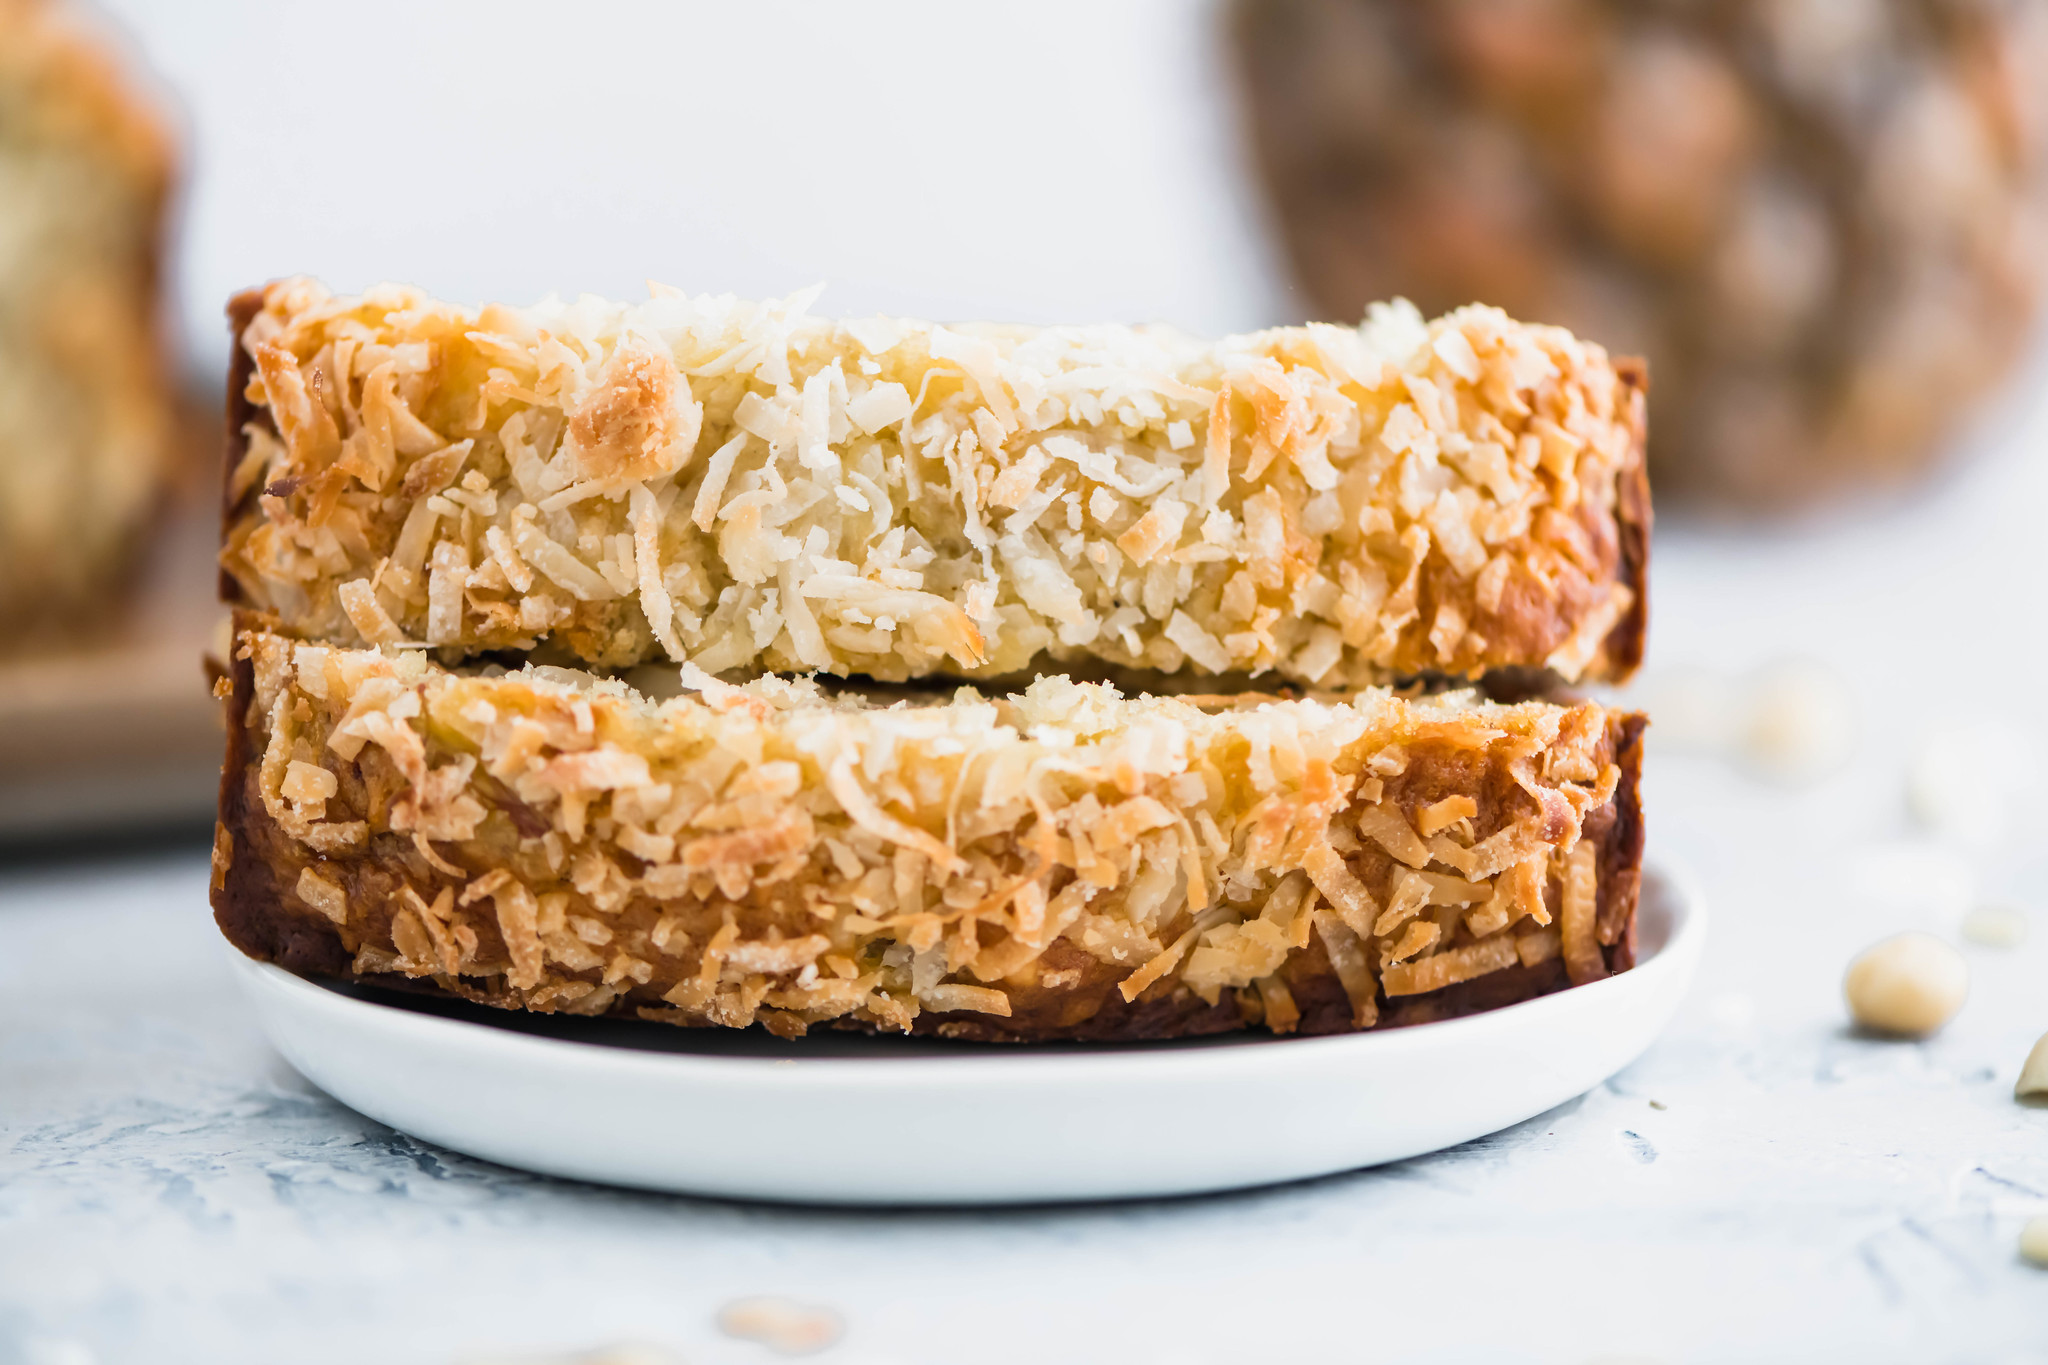 We're upgrading the standard banana bread today with delicious Hawaiian ingredients. This Hawaiian Banana Bread is packed with pineapple, macadamia nuts and coconut for all the tropical vibes.